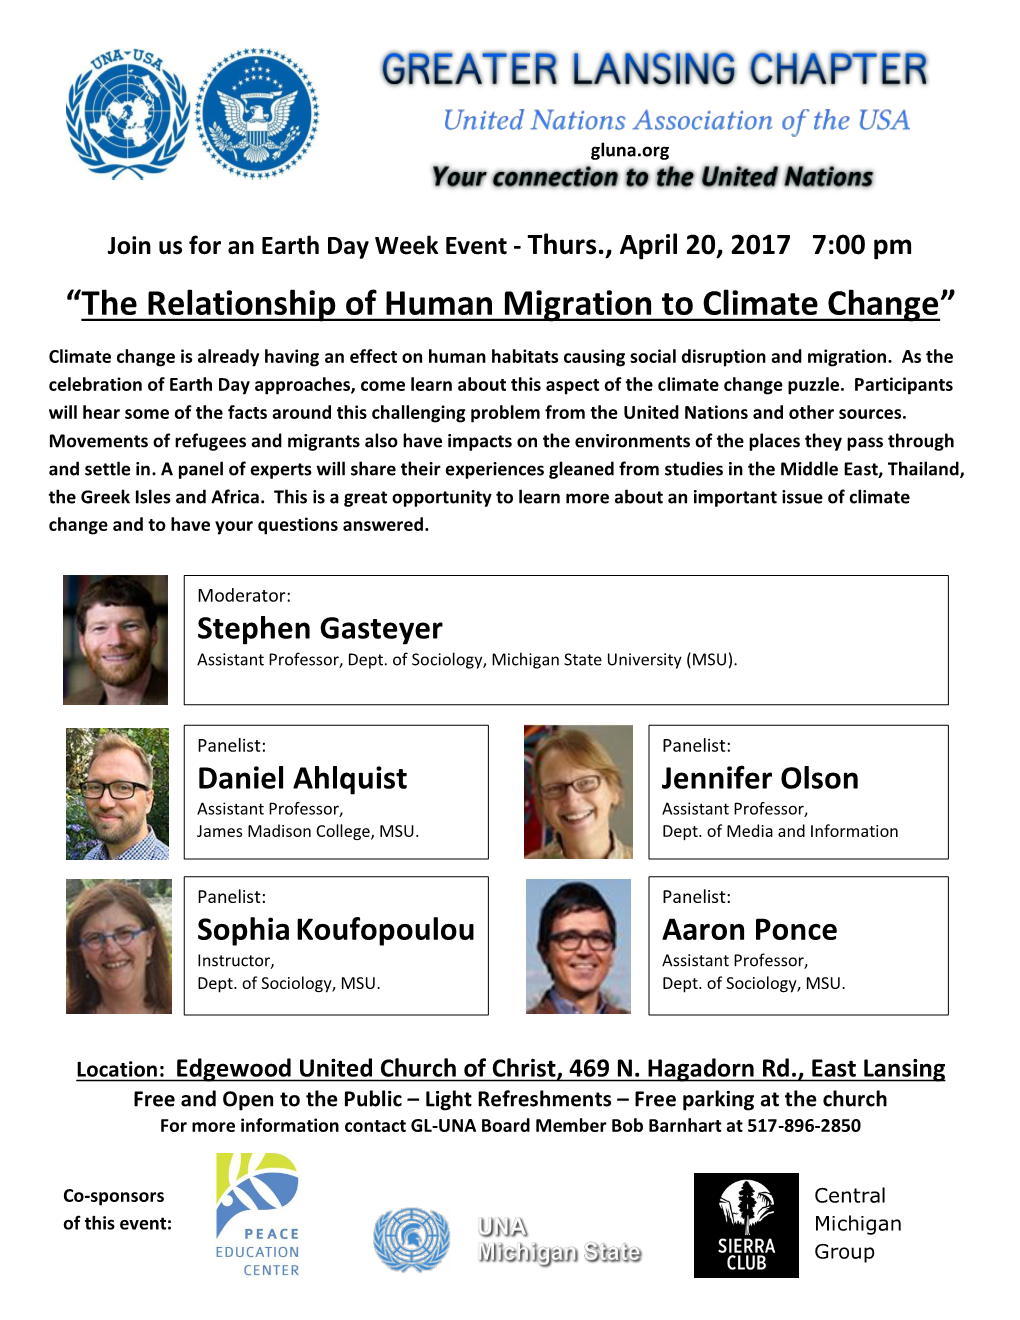 “The Relationship of Human Migration to Climate Change”